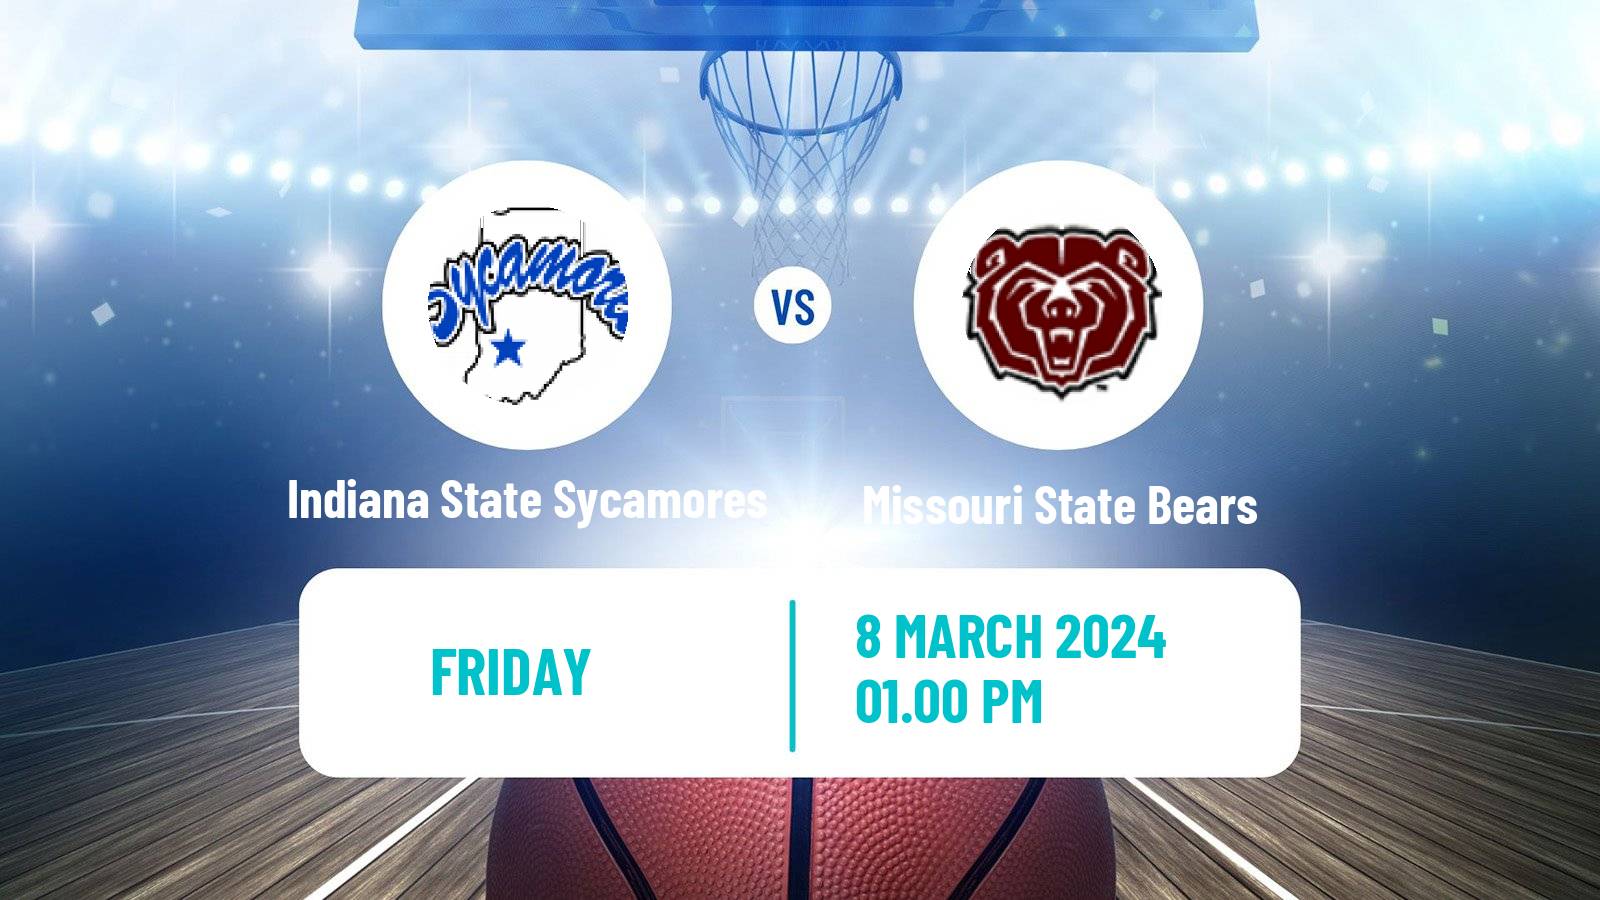 Basketball NCAA College Basketball Indiana State Sycamores - Missouri State Bears